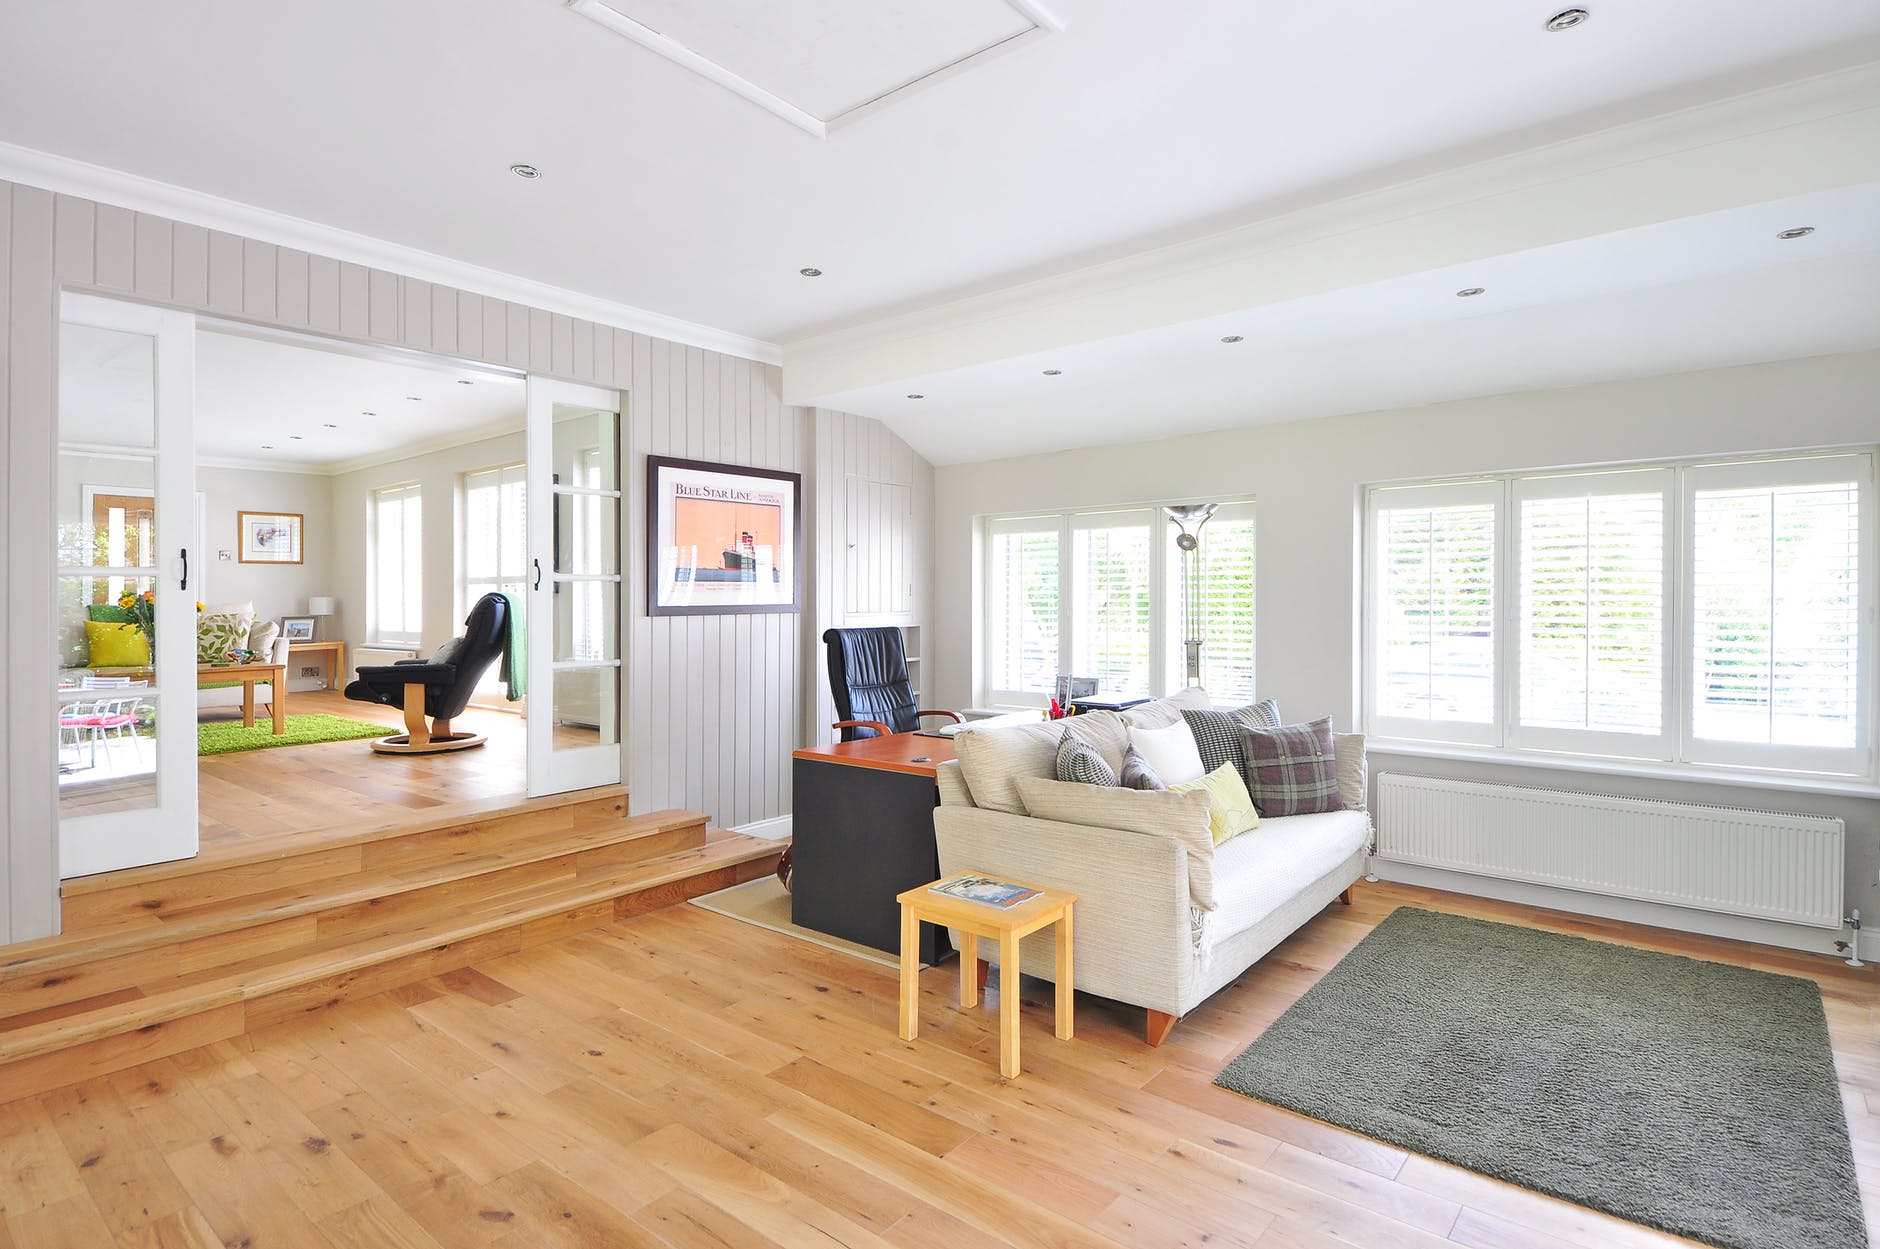 Should You Switch to Wood Flooring in Your Home?